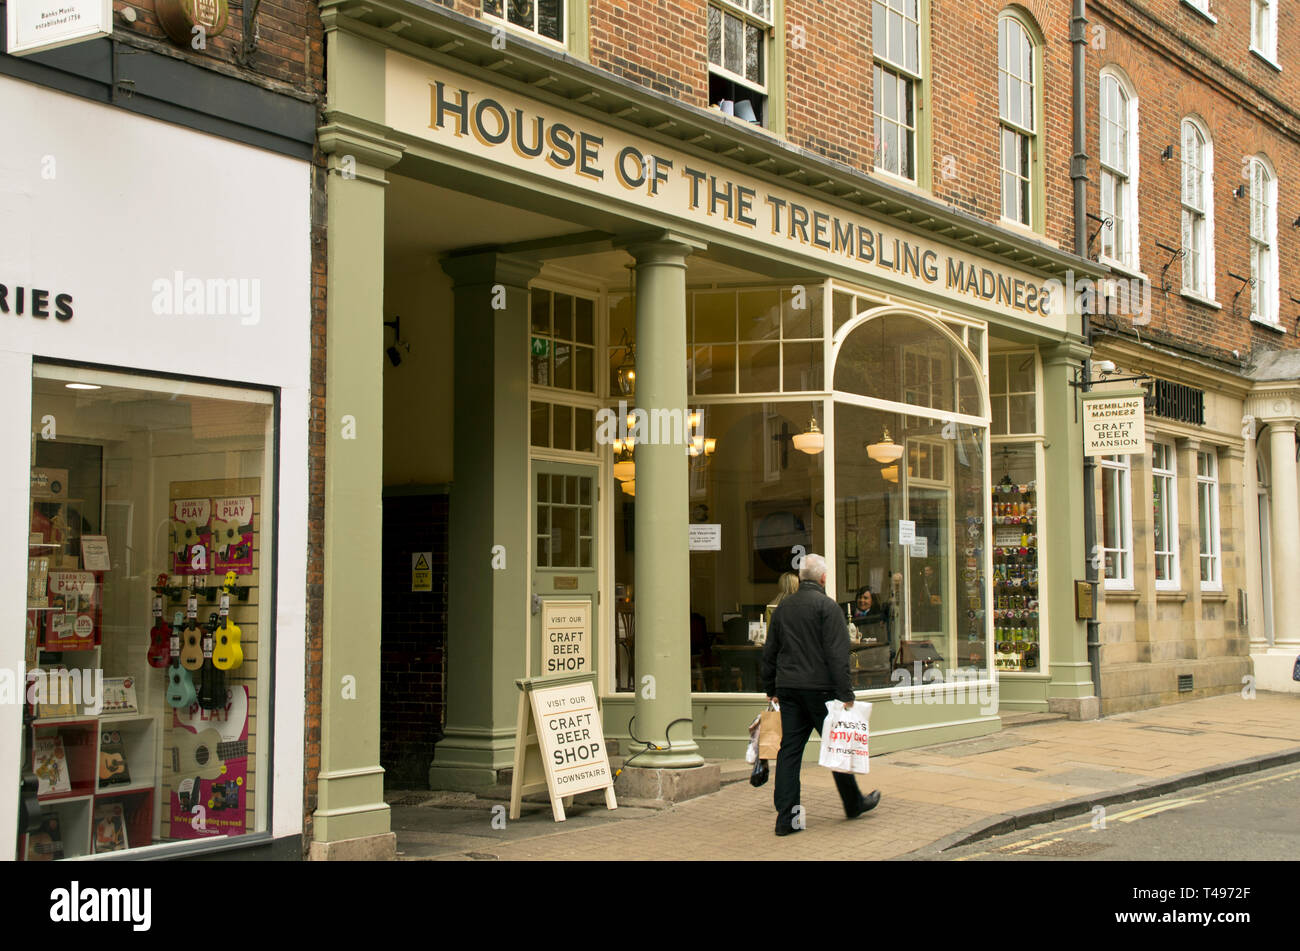 House of the Trembling Madness, York Stock Photo